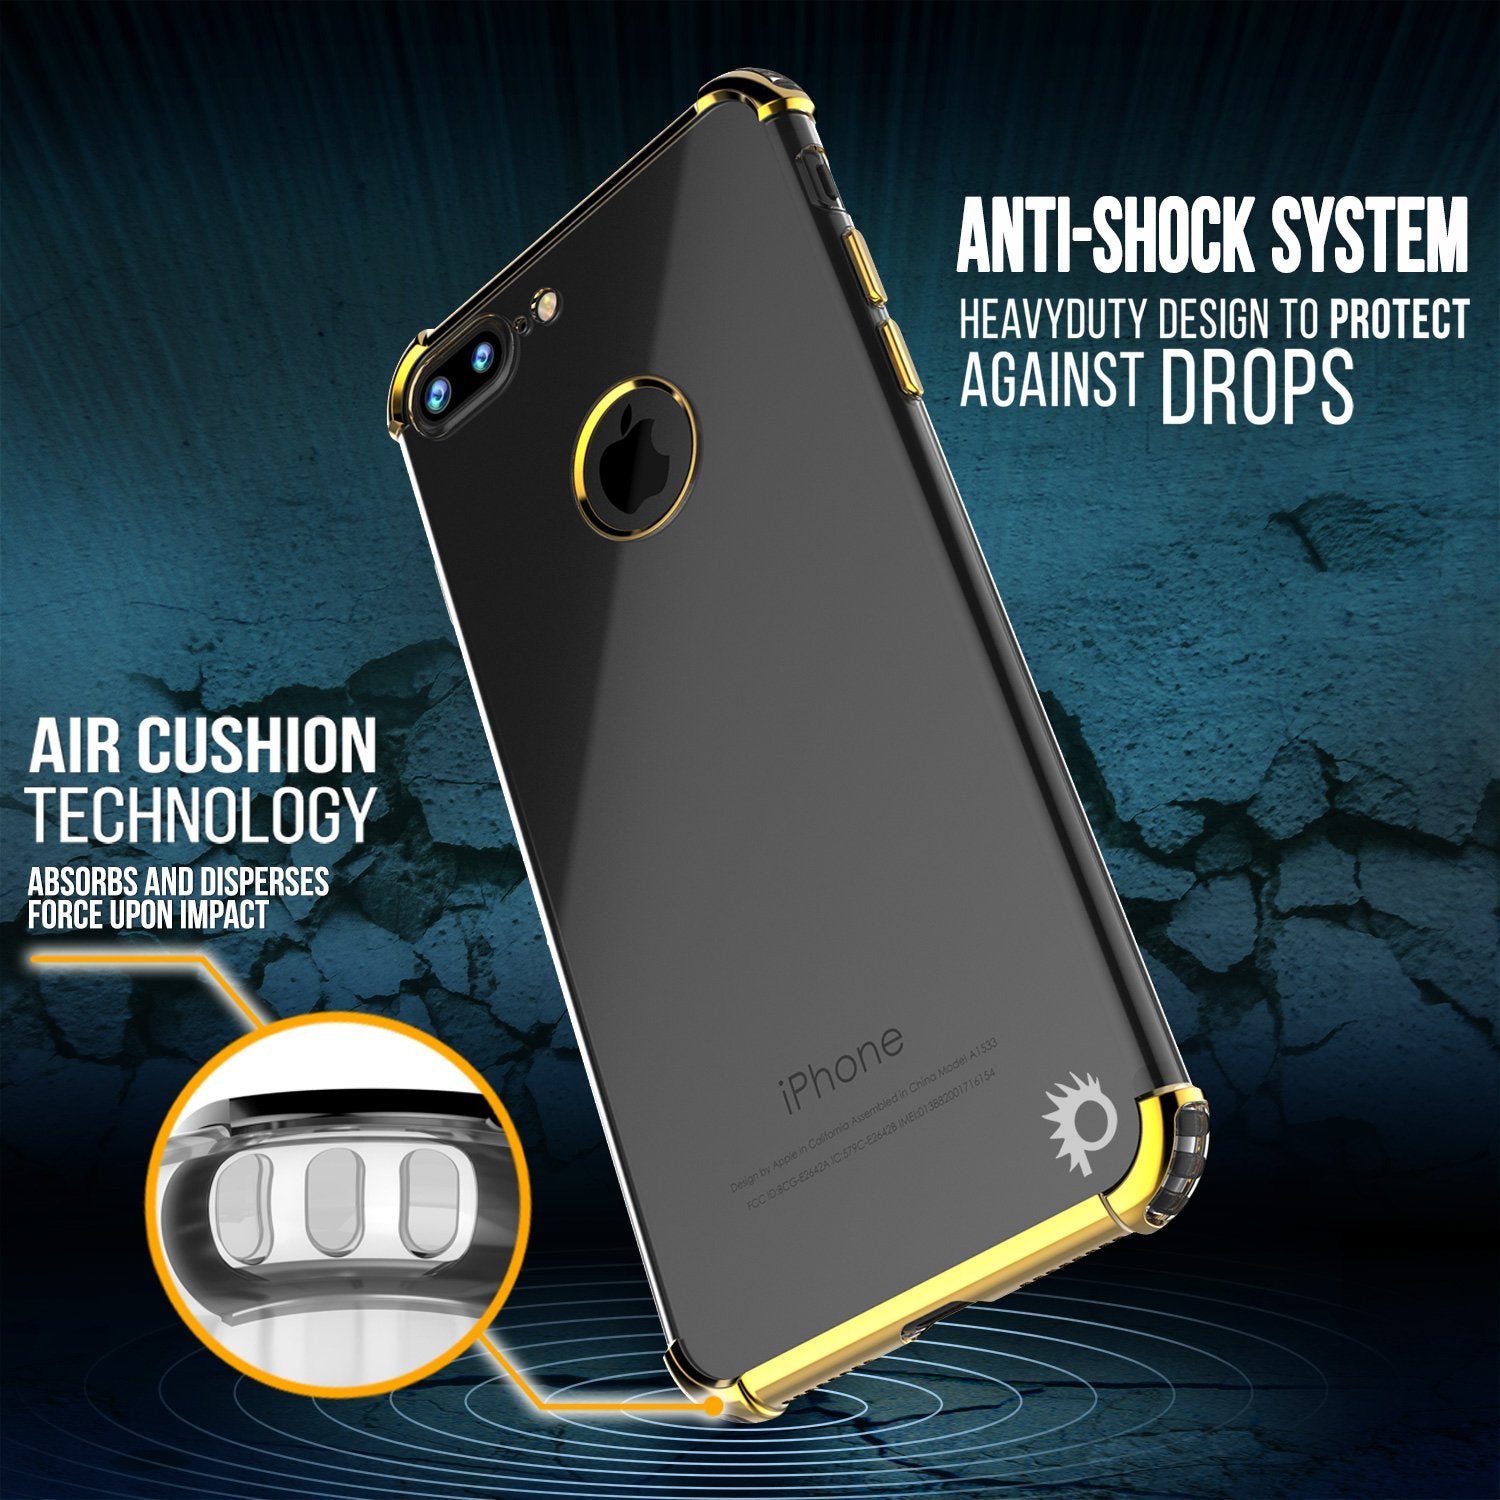 iPhone 7 PLUS Case, Punkcase [BLAZE SERIES] Protective Cover W/ PunkShield Screen Protector [Shockproof] [Slim Fit] for Apple iPhone 7/8/6/6s PLUS [Gold]